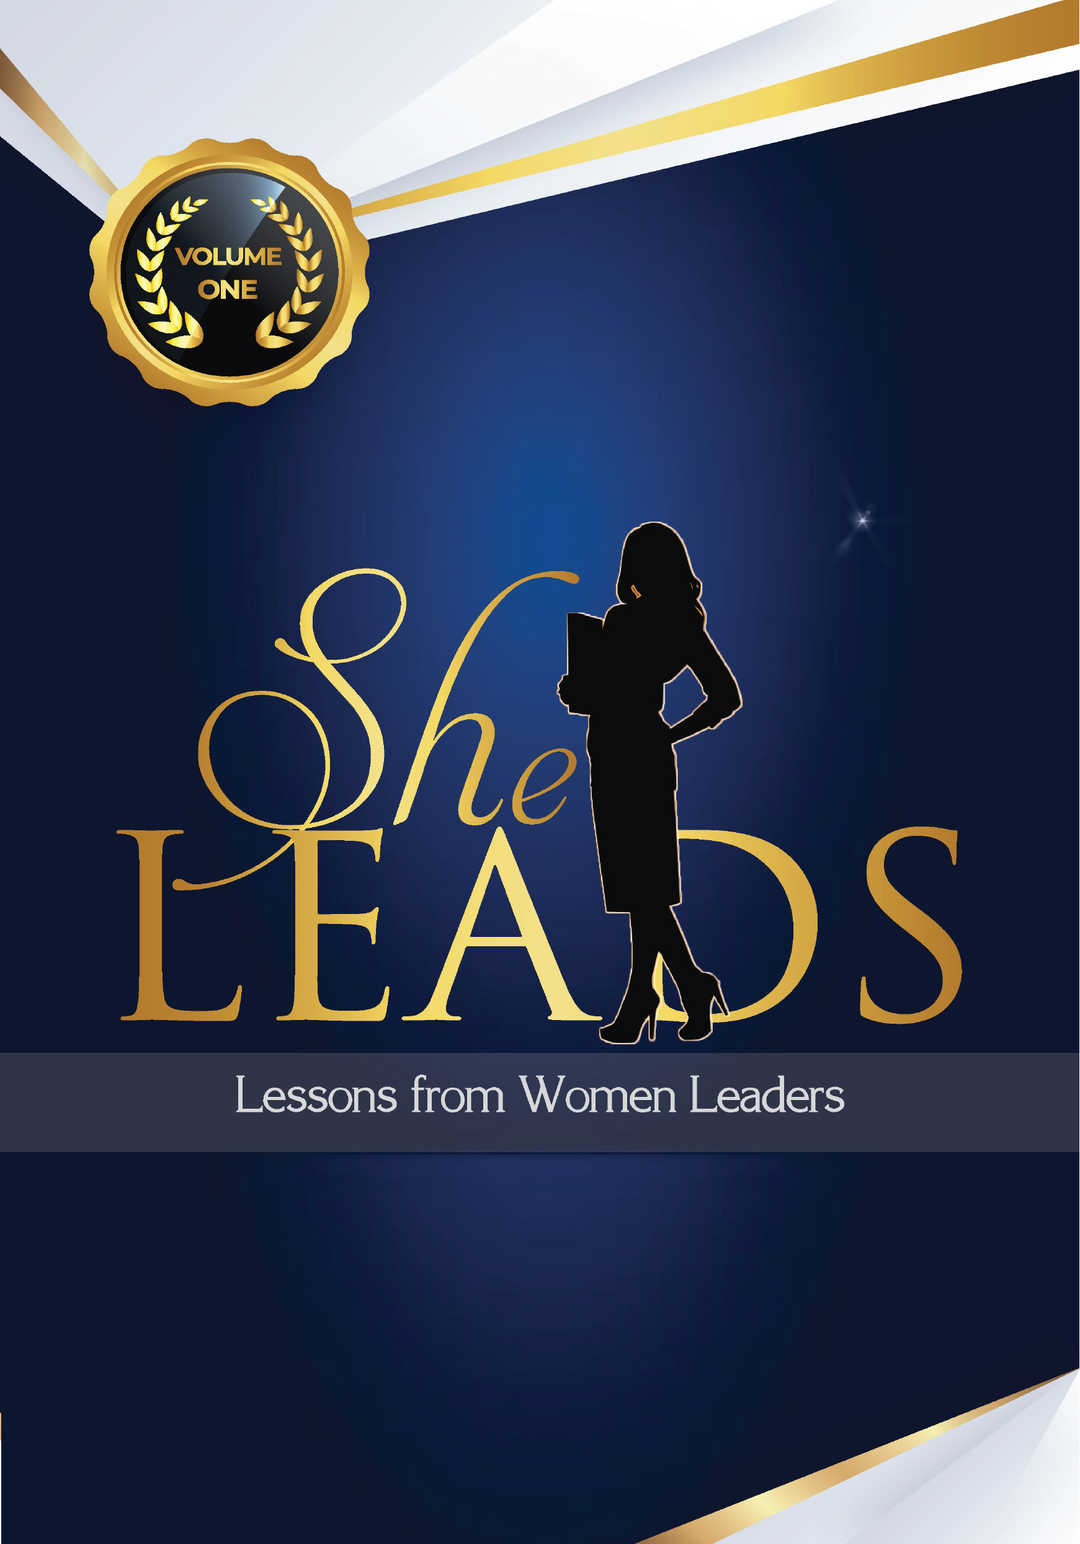 She Leads: Lessons from Women Leaders